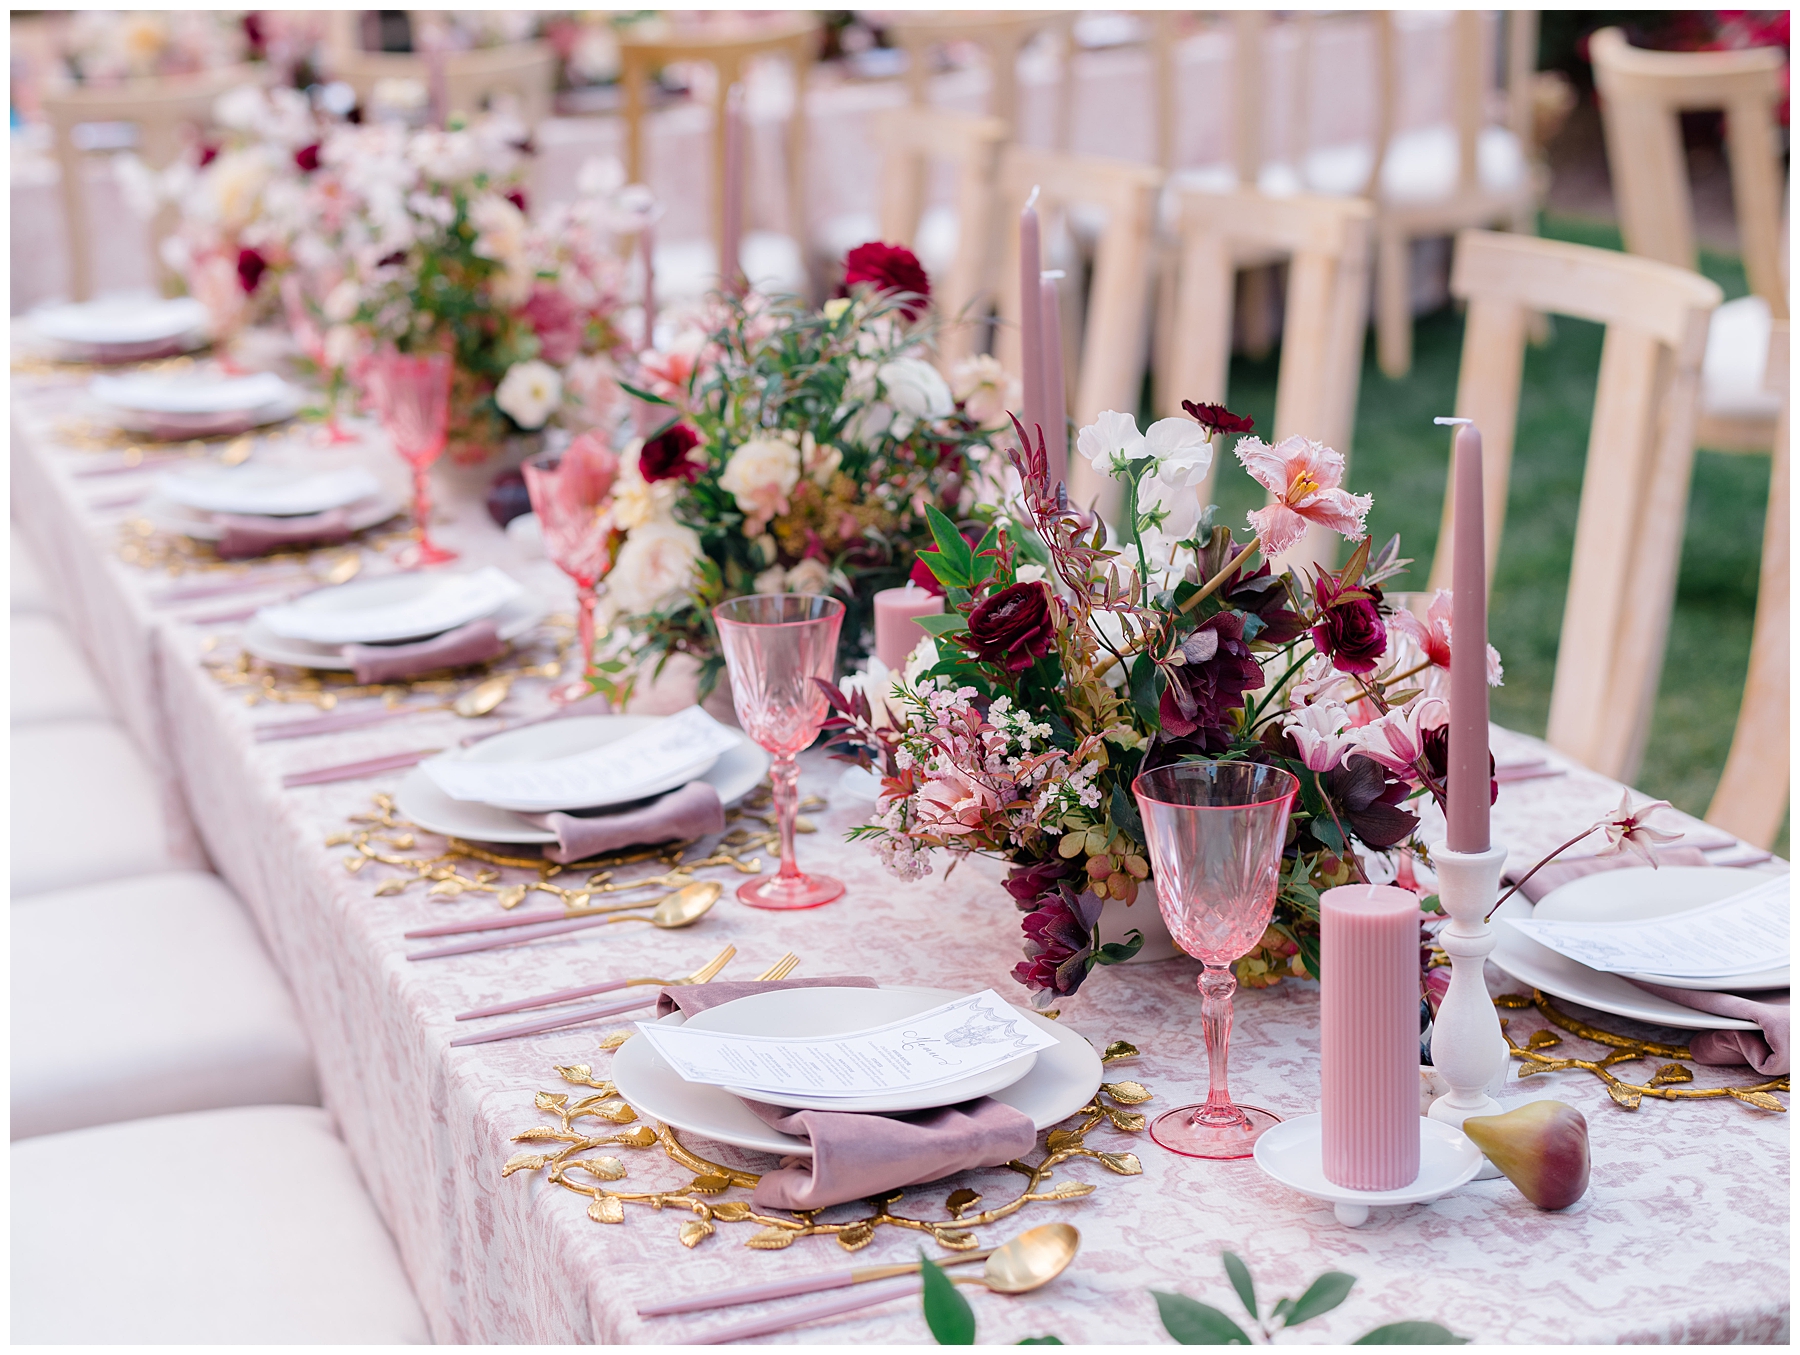 candles, place settings, and centerpieces